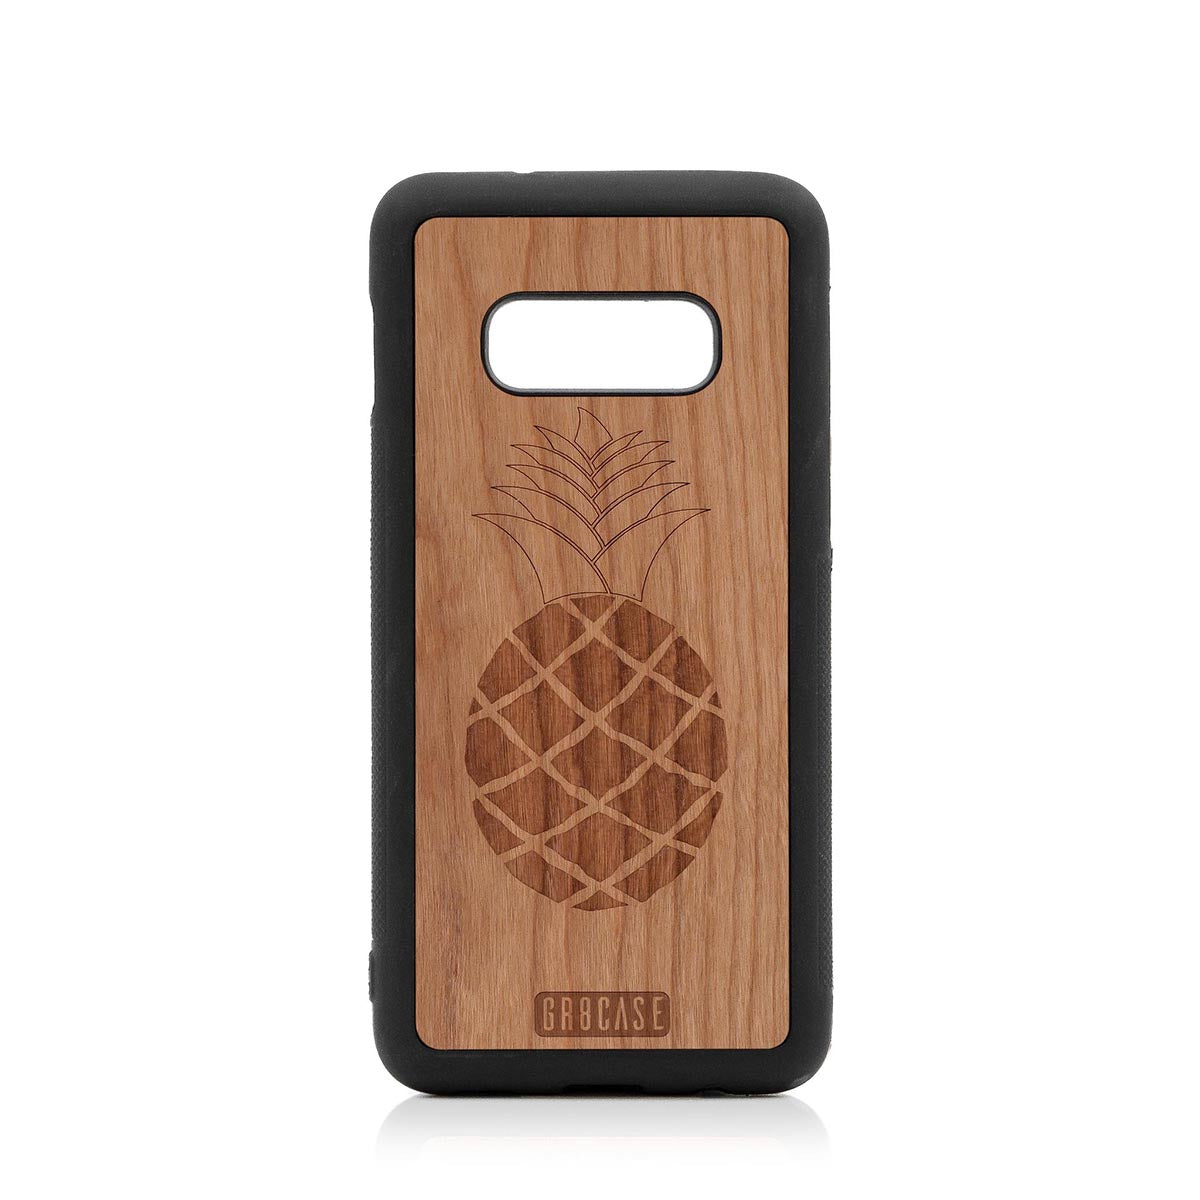 Pineapple Design Wood Case Samsung Galaxy S10E by GR8CASE